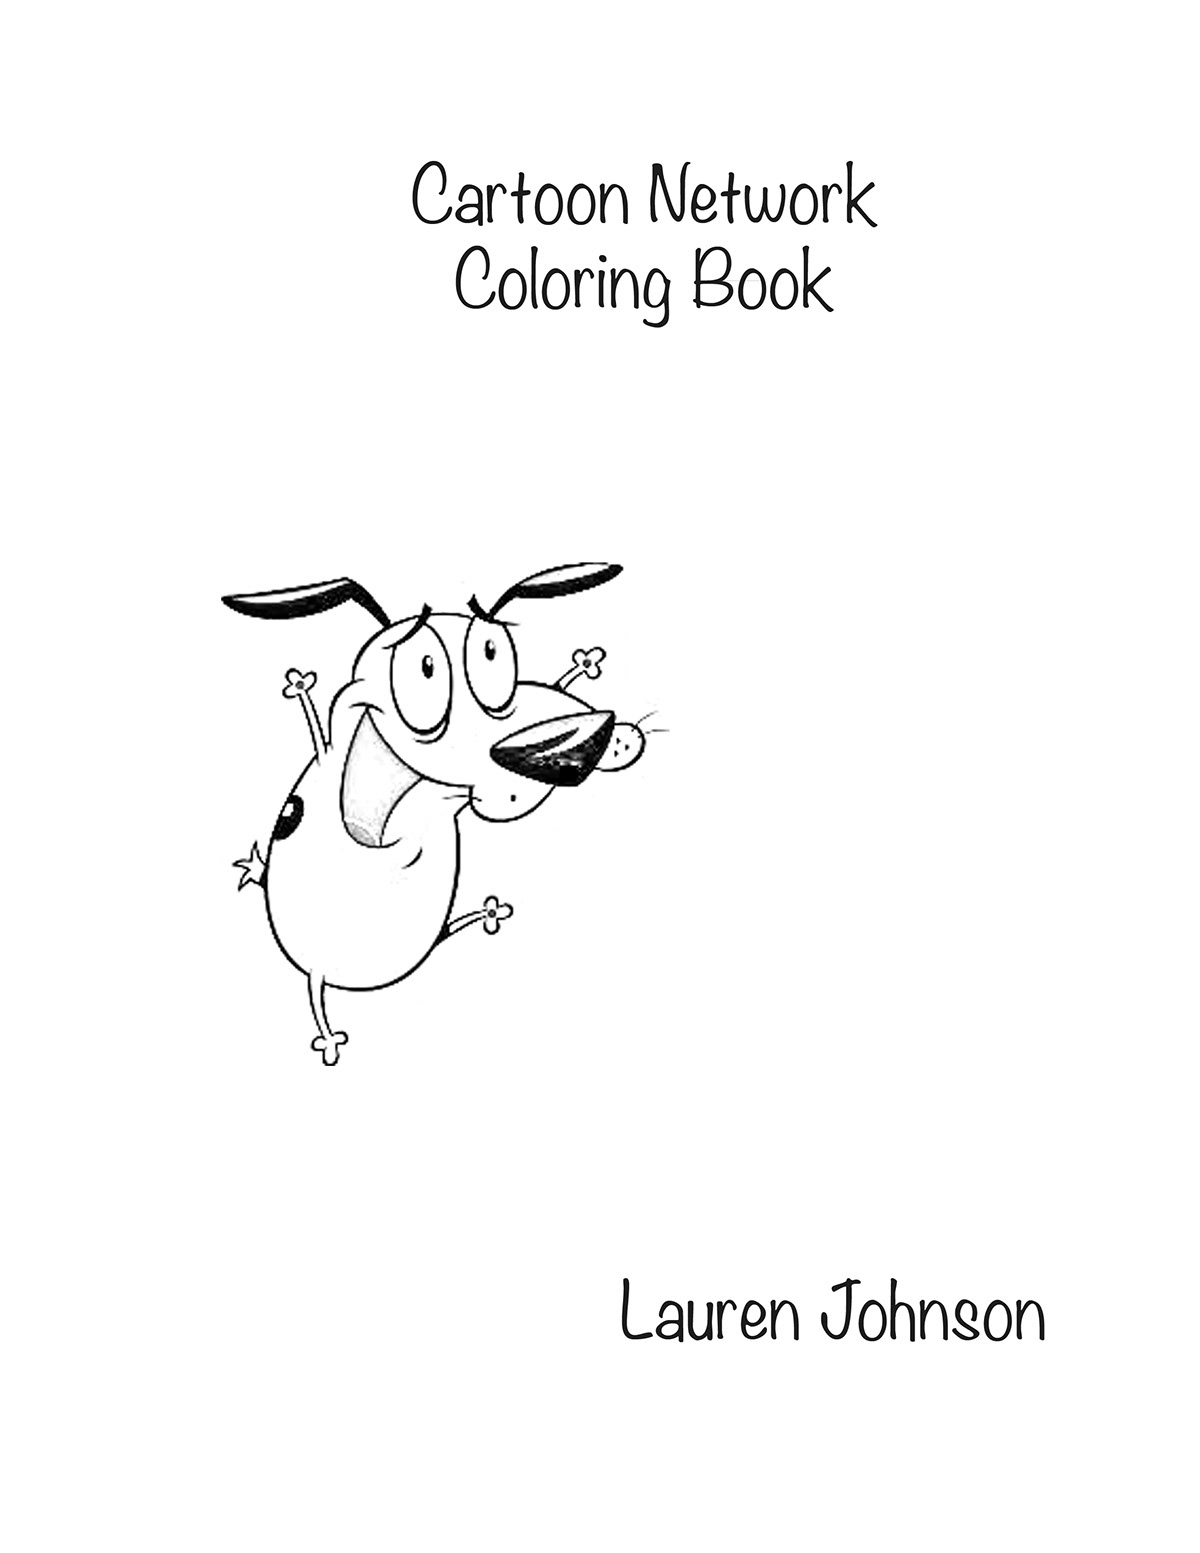 Cartoon Network coloring book on Behance